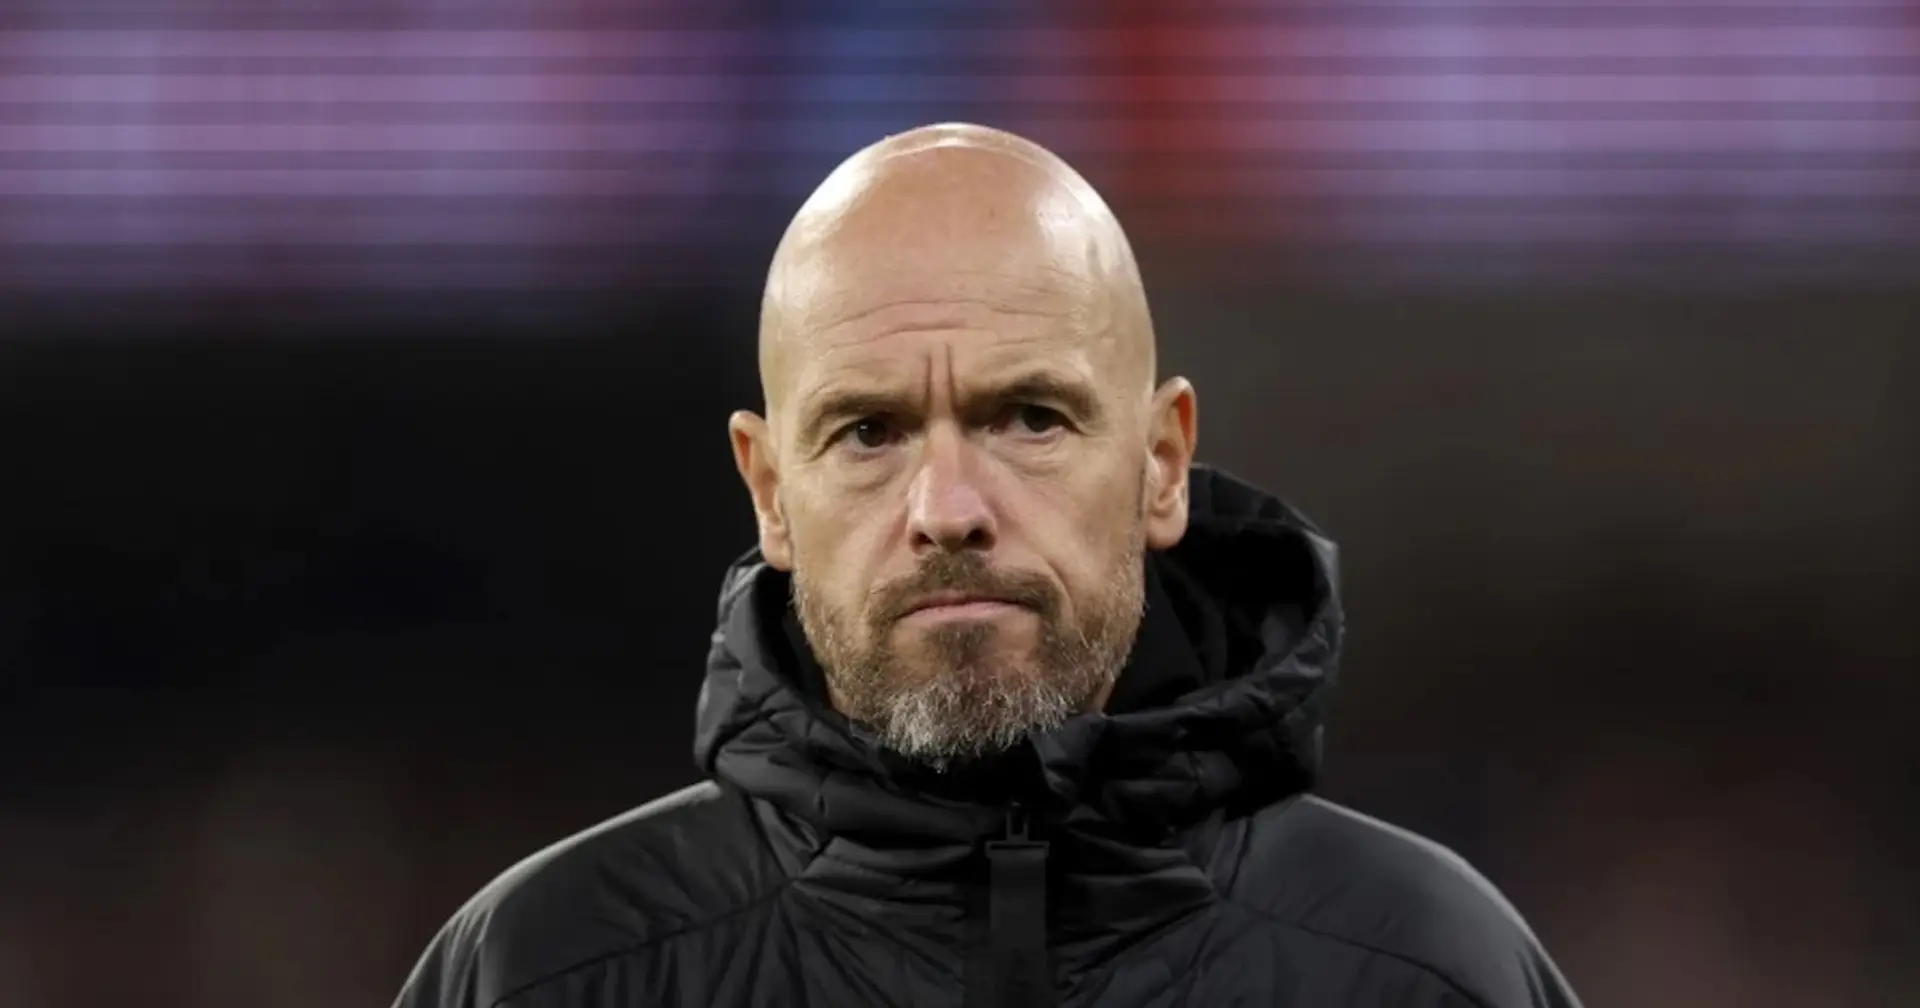 Man United players 'uncertain' about Ten Hag & 2 more big stories you might've missed